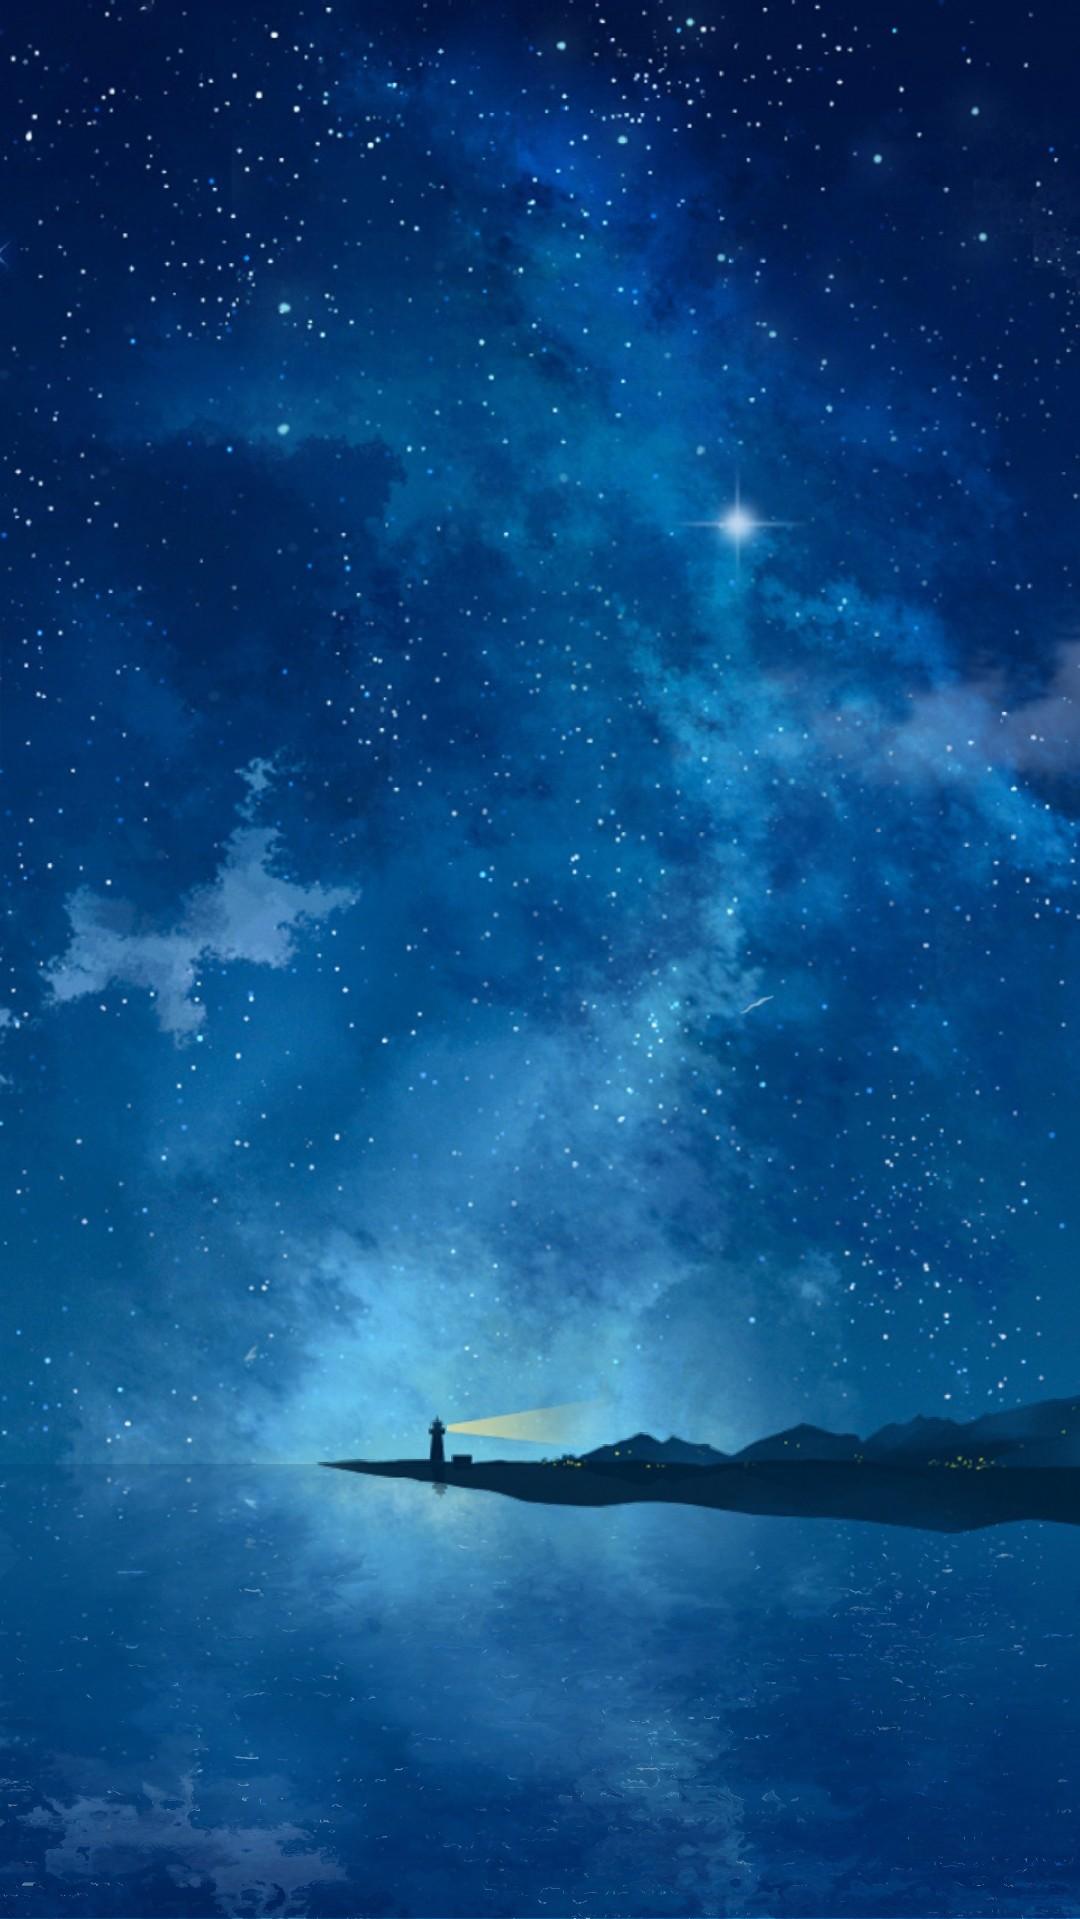 Girl And Starry Sky Live Wallpaper - Live Wallpaper